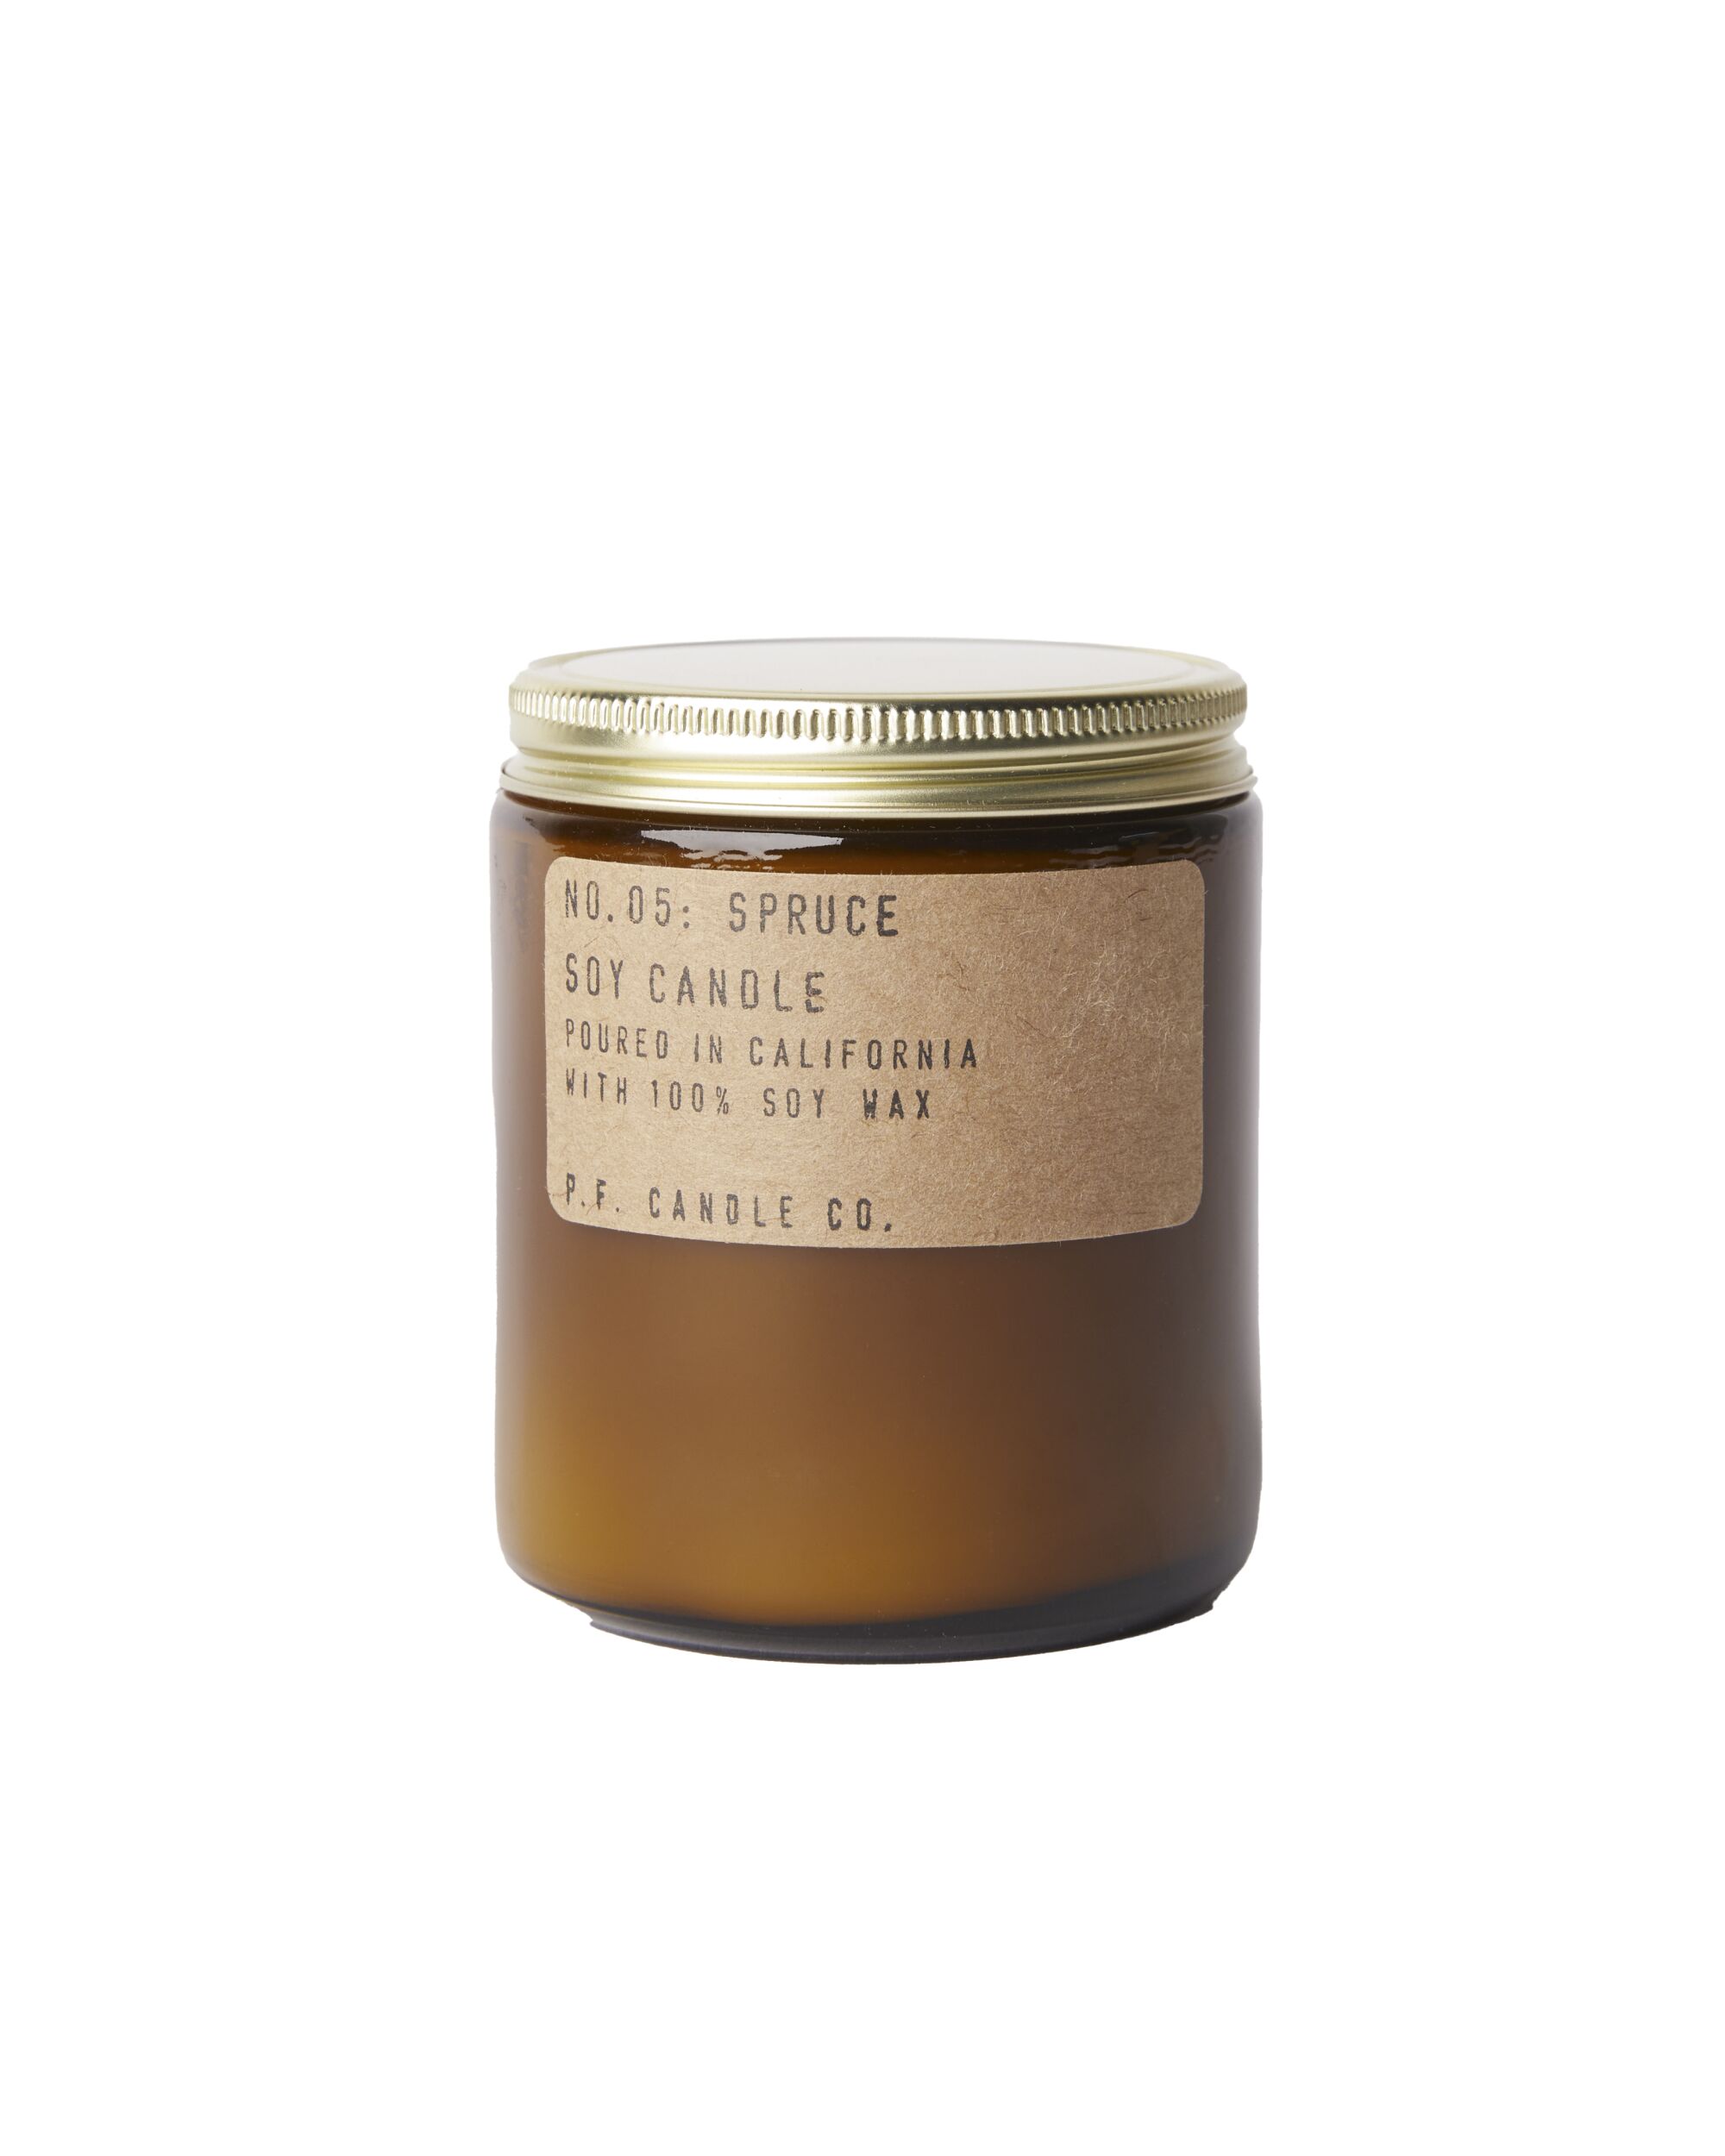 Spruce Soy Candle from PF Candle